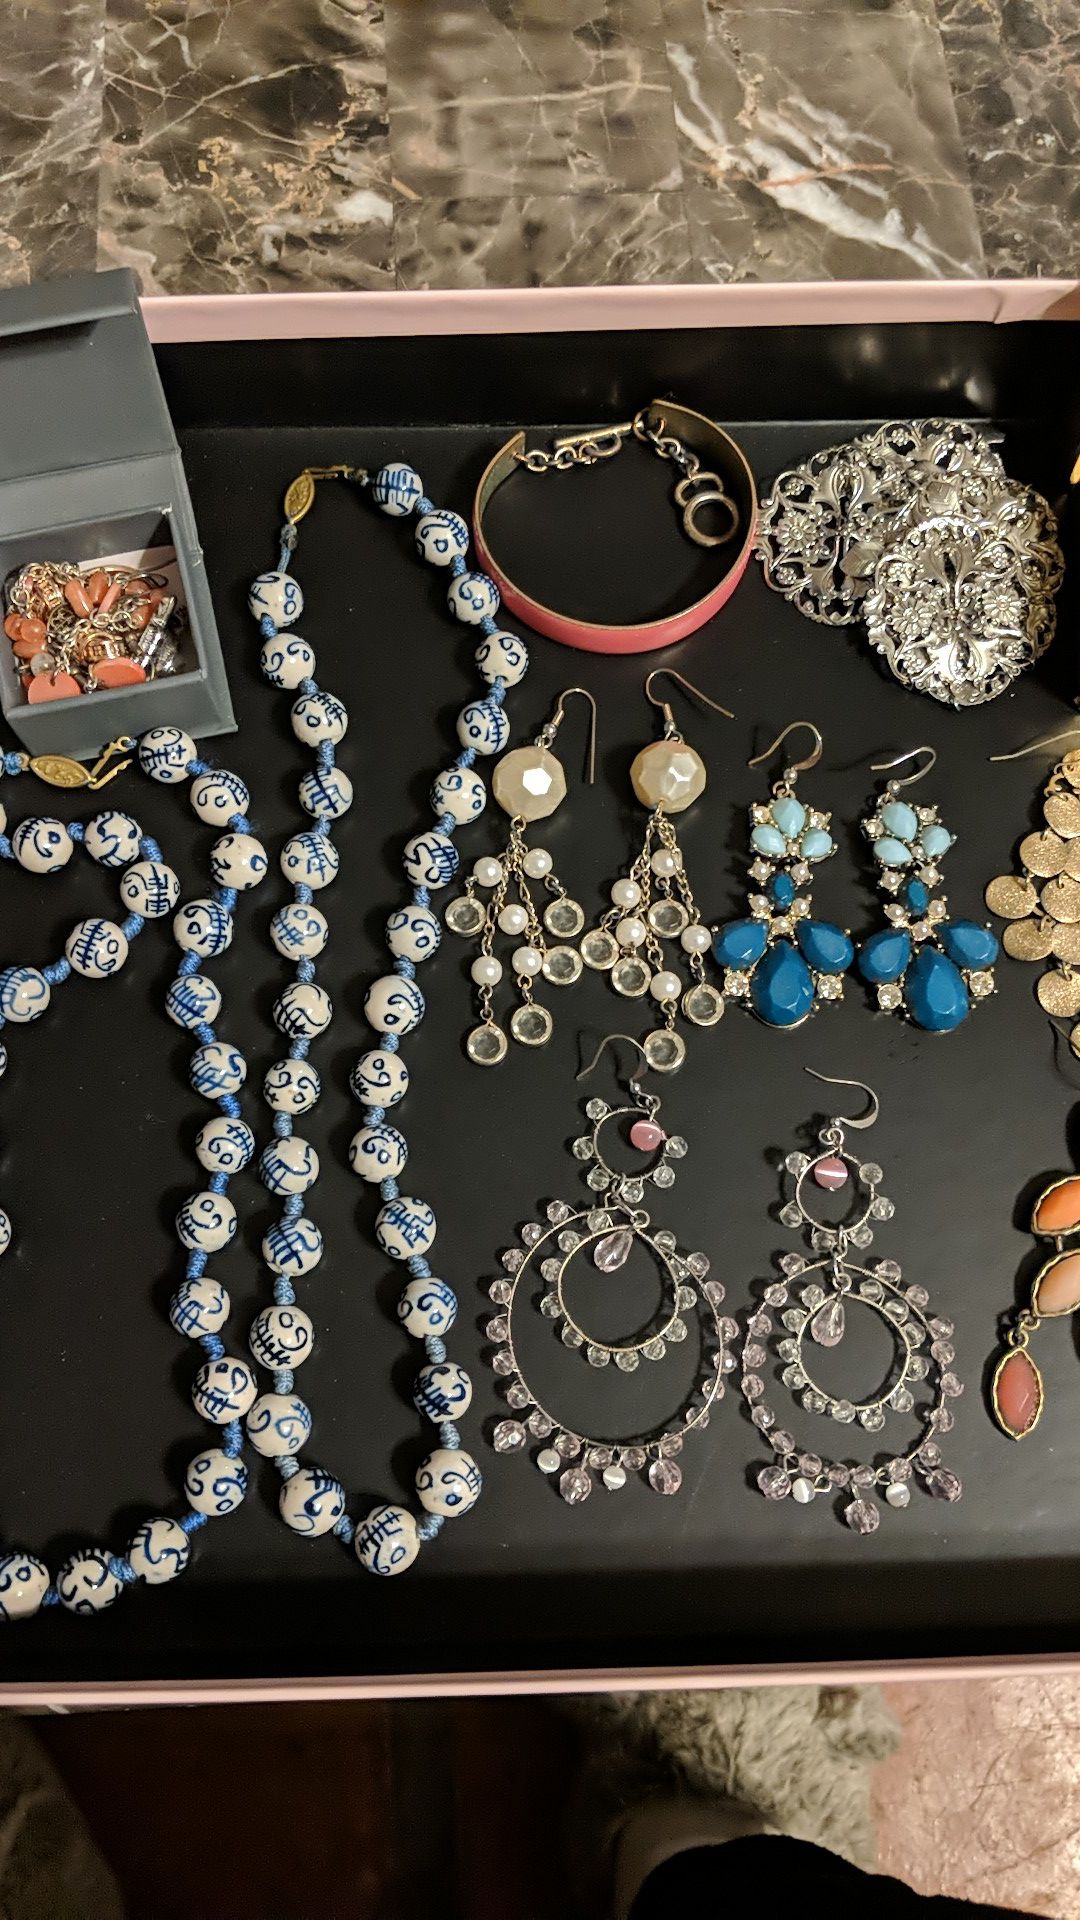 My jewelry collection, moving out of country!